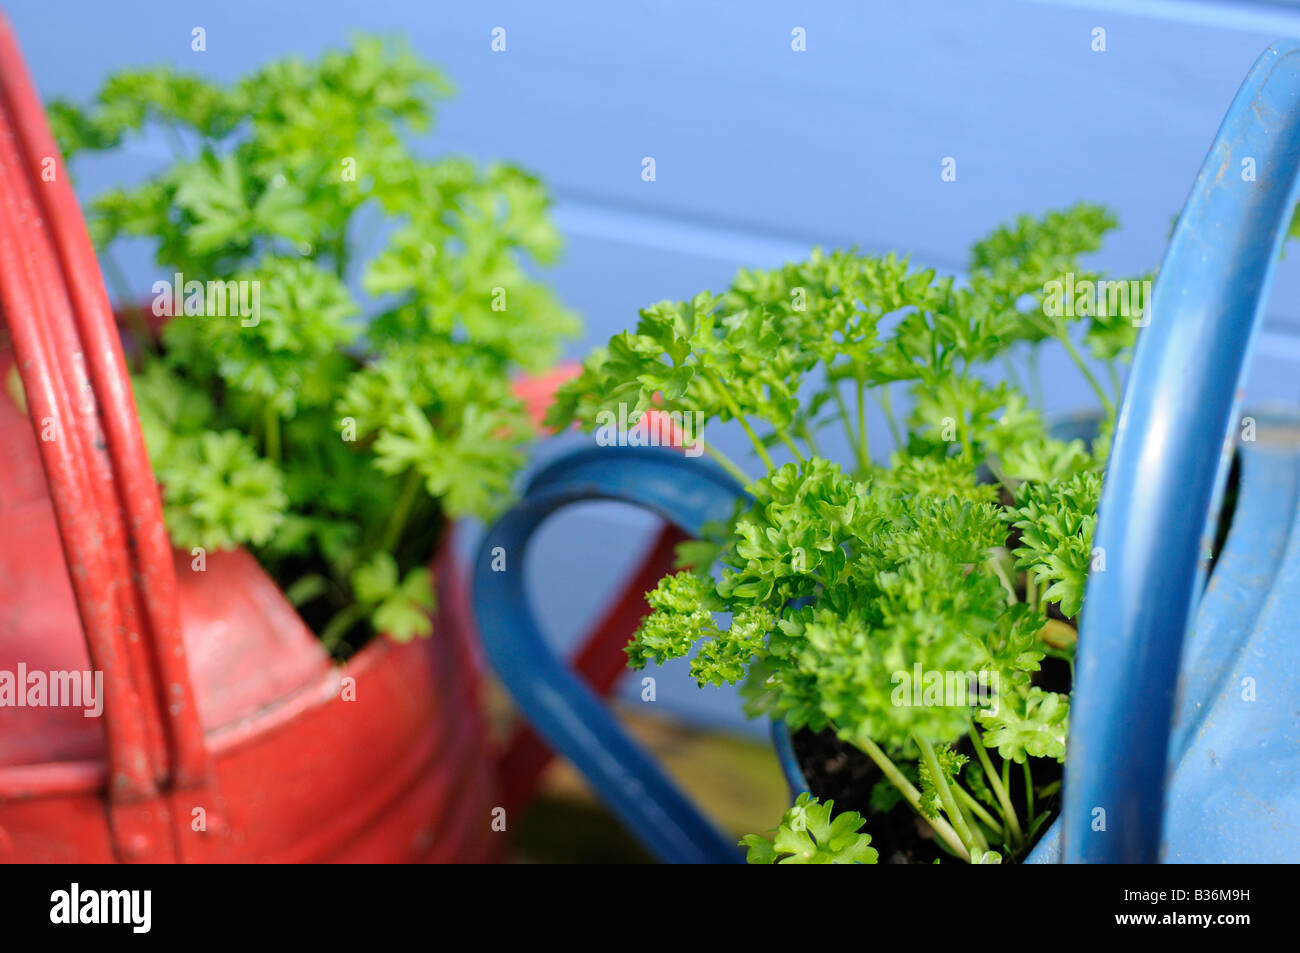 Recycled watering cans planted with parsley Stock Photo